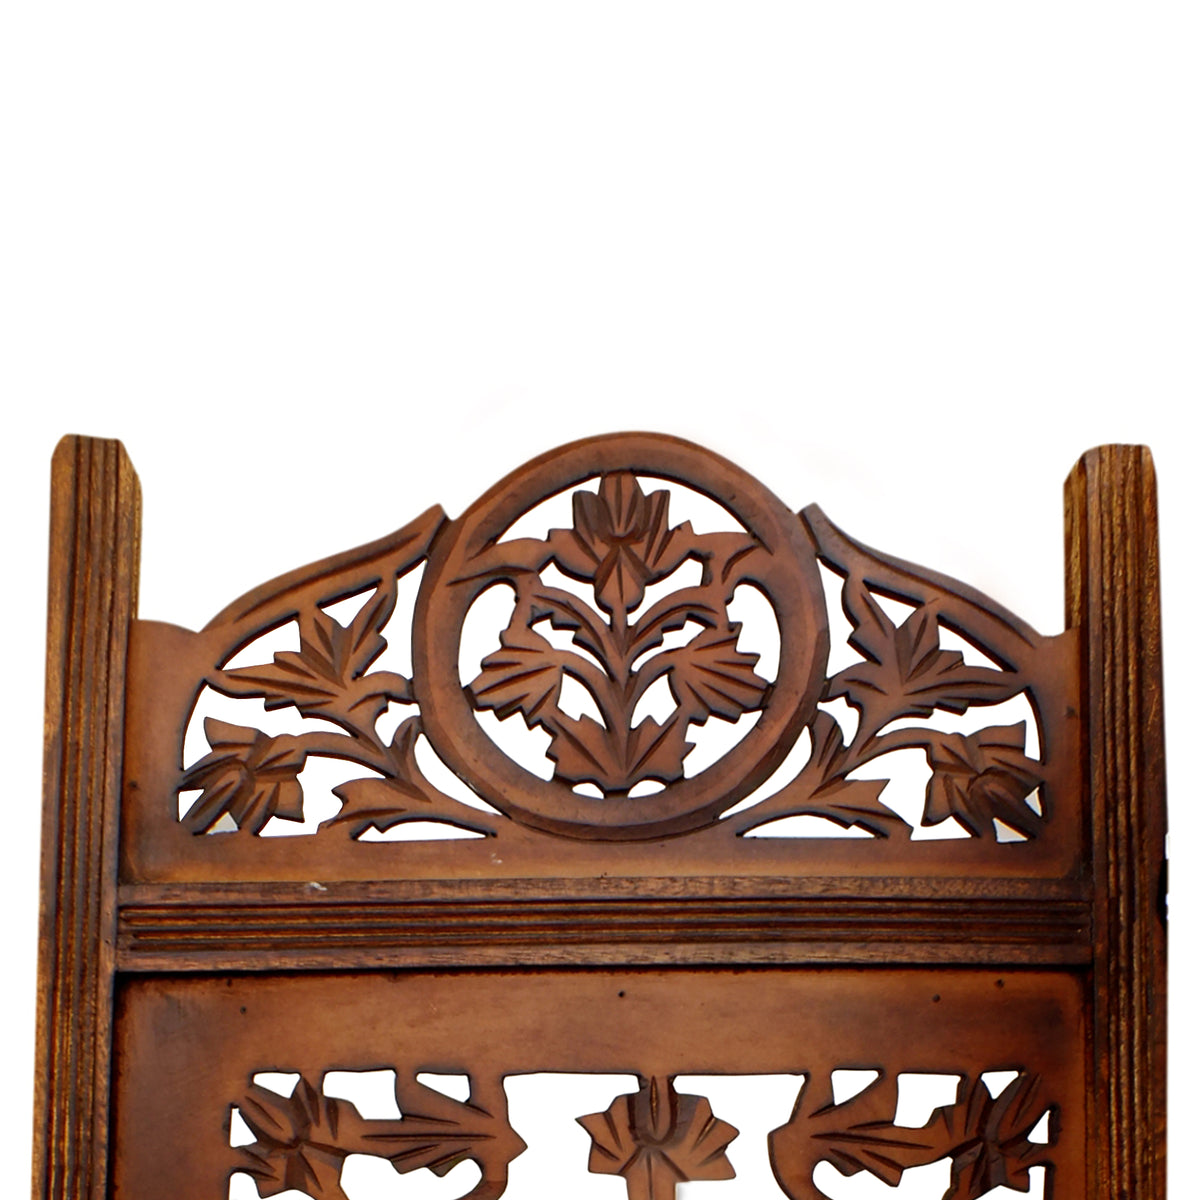 UPT-176789 Handcrafted Wooden 4 Panel Room Divider Screen Featuring Lotus Pattern-Reversible